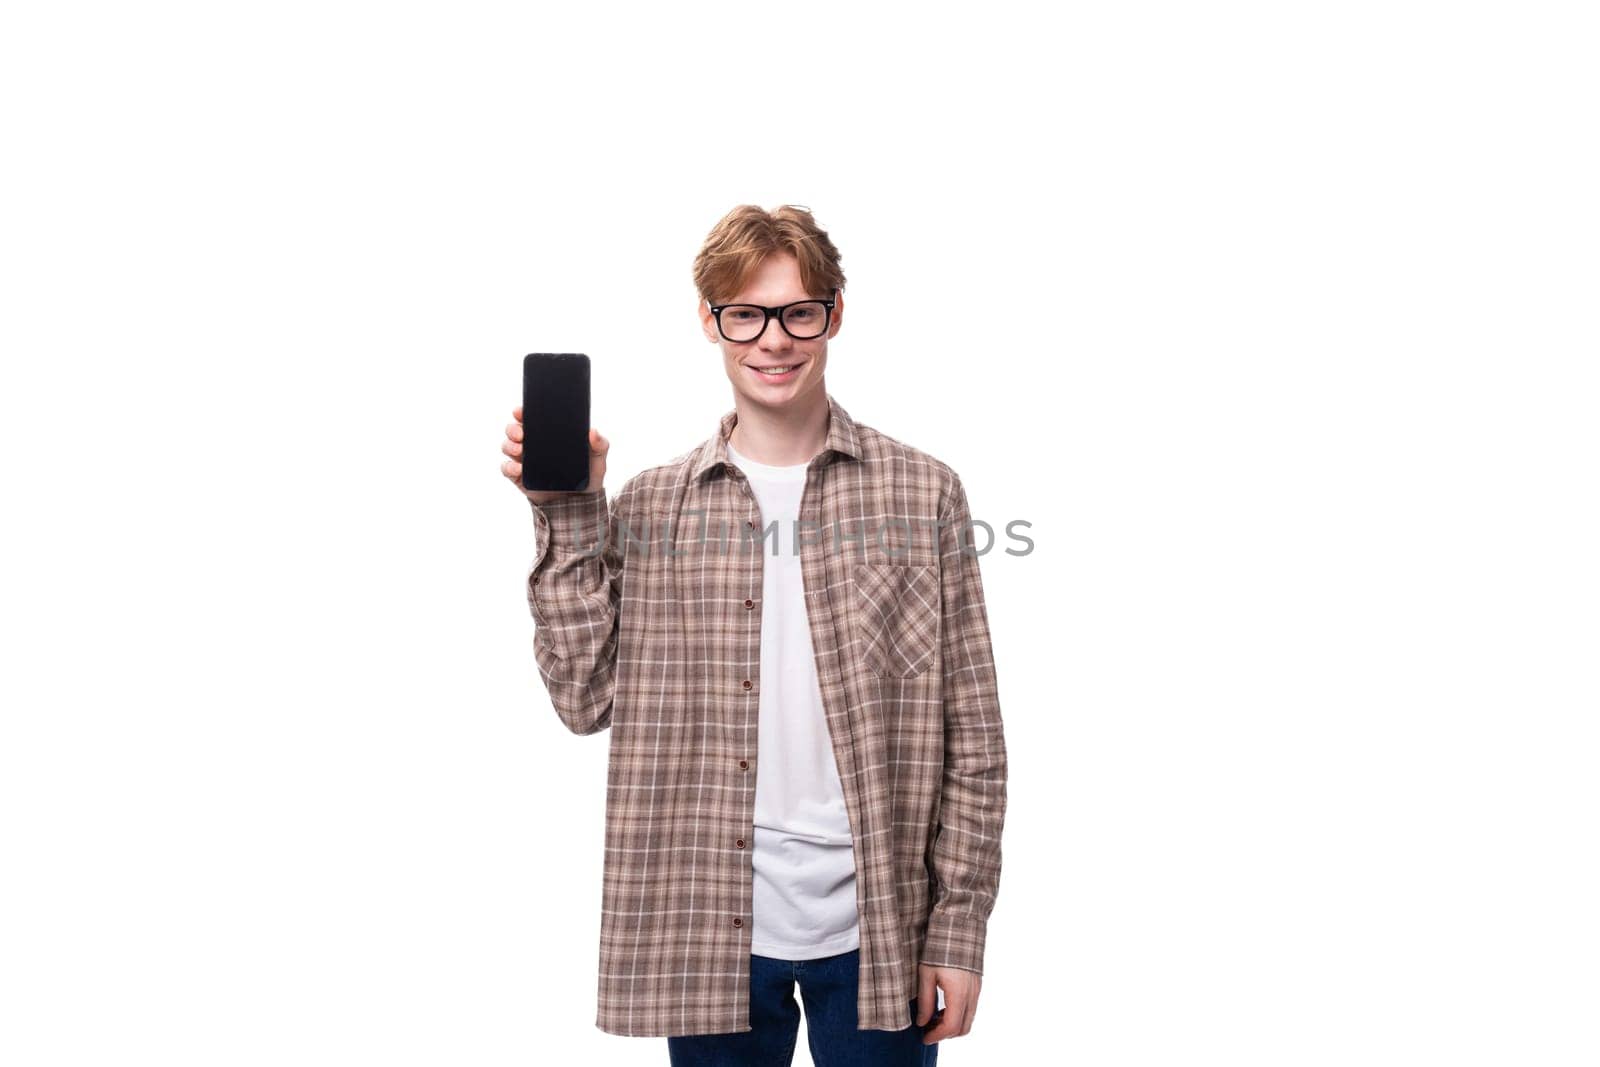 young stylish man with red hair dressed in a summer shirt shows the screen of a vertical smartphone with a mockup.